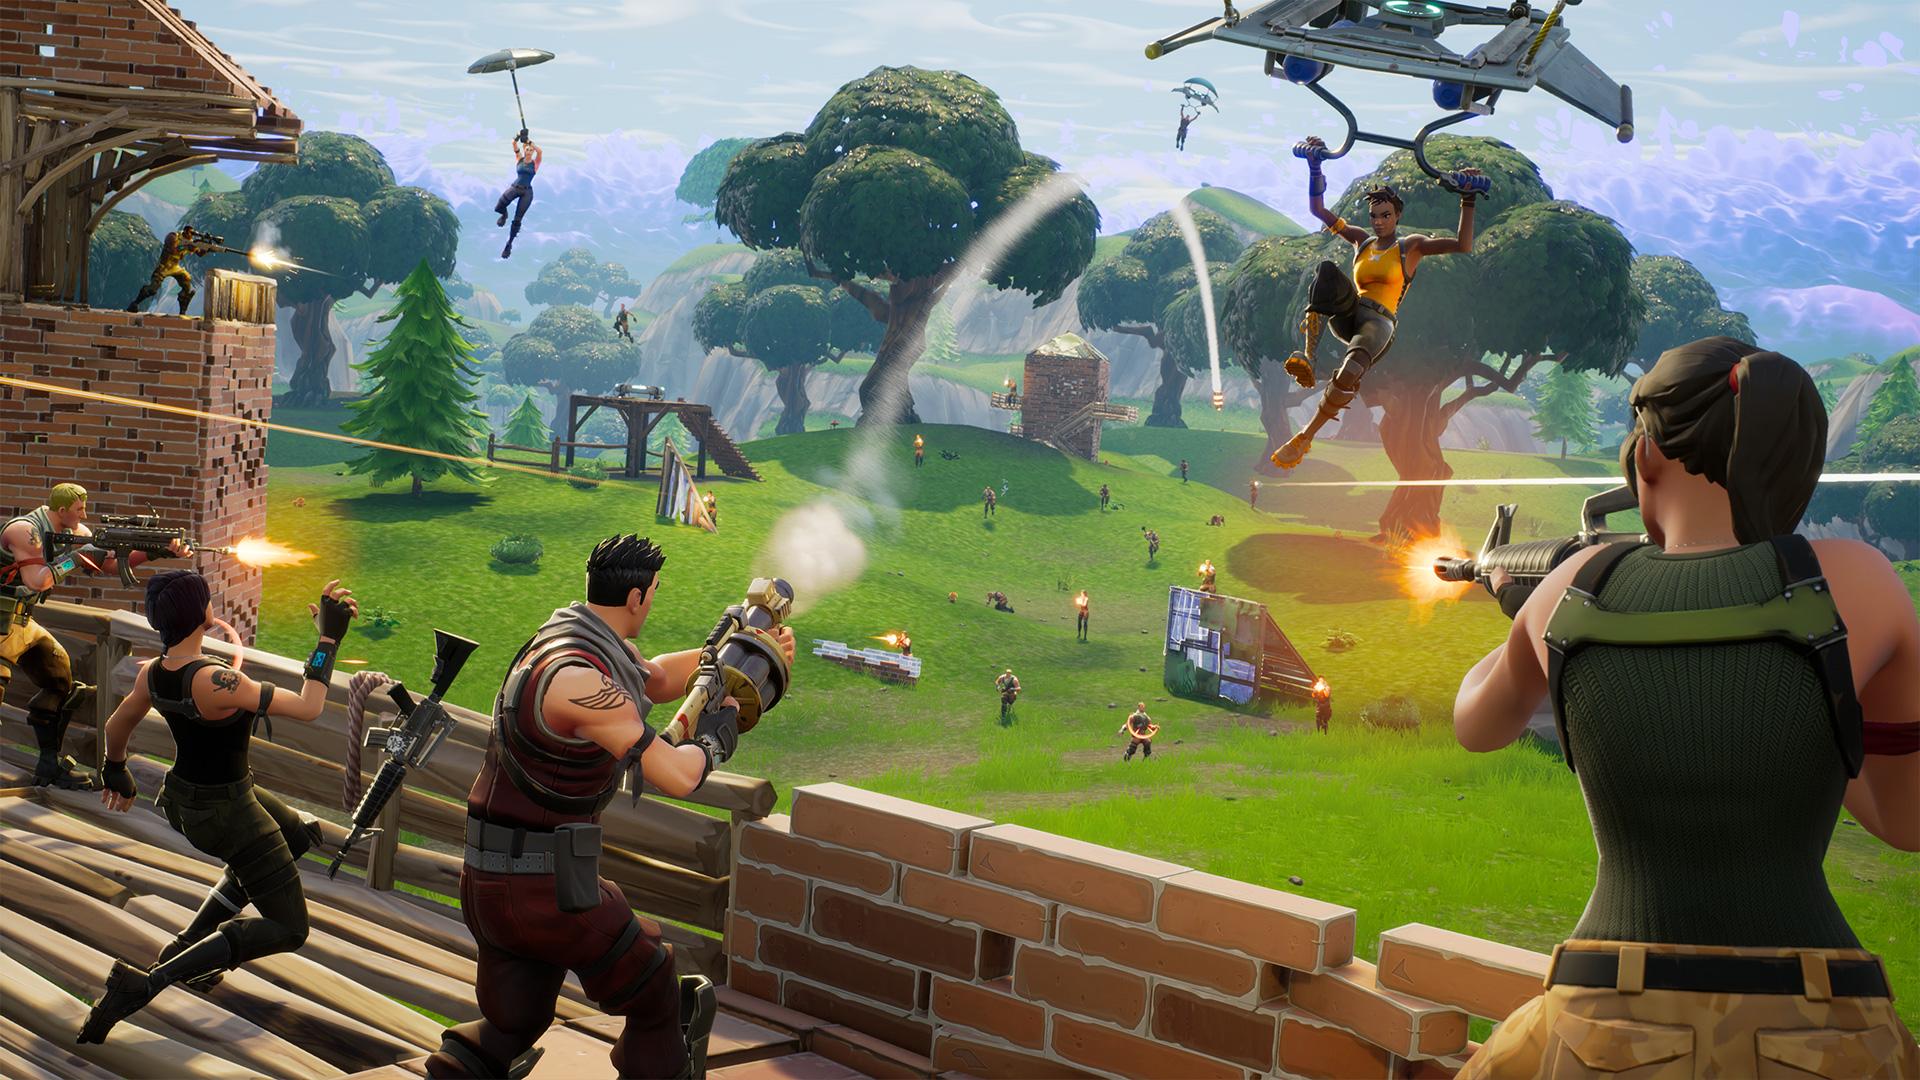 Fortnite Plans To Allow Players To Run Mini Battle Royale Games - epic games continues to support fortnite with some great content and changes almost on a constant basis update 8 10 added new weapons and items to the game